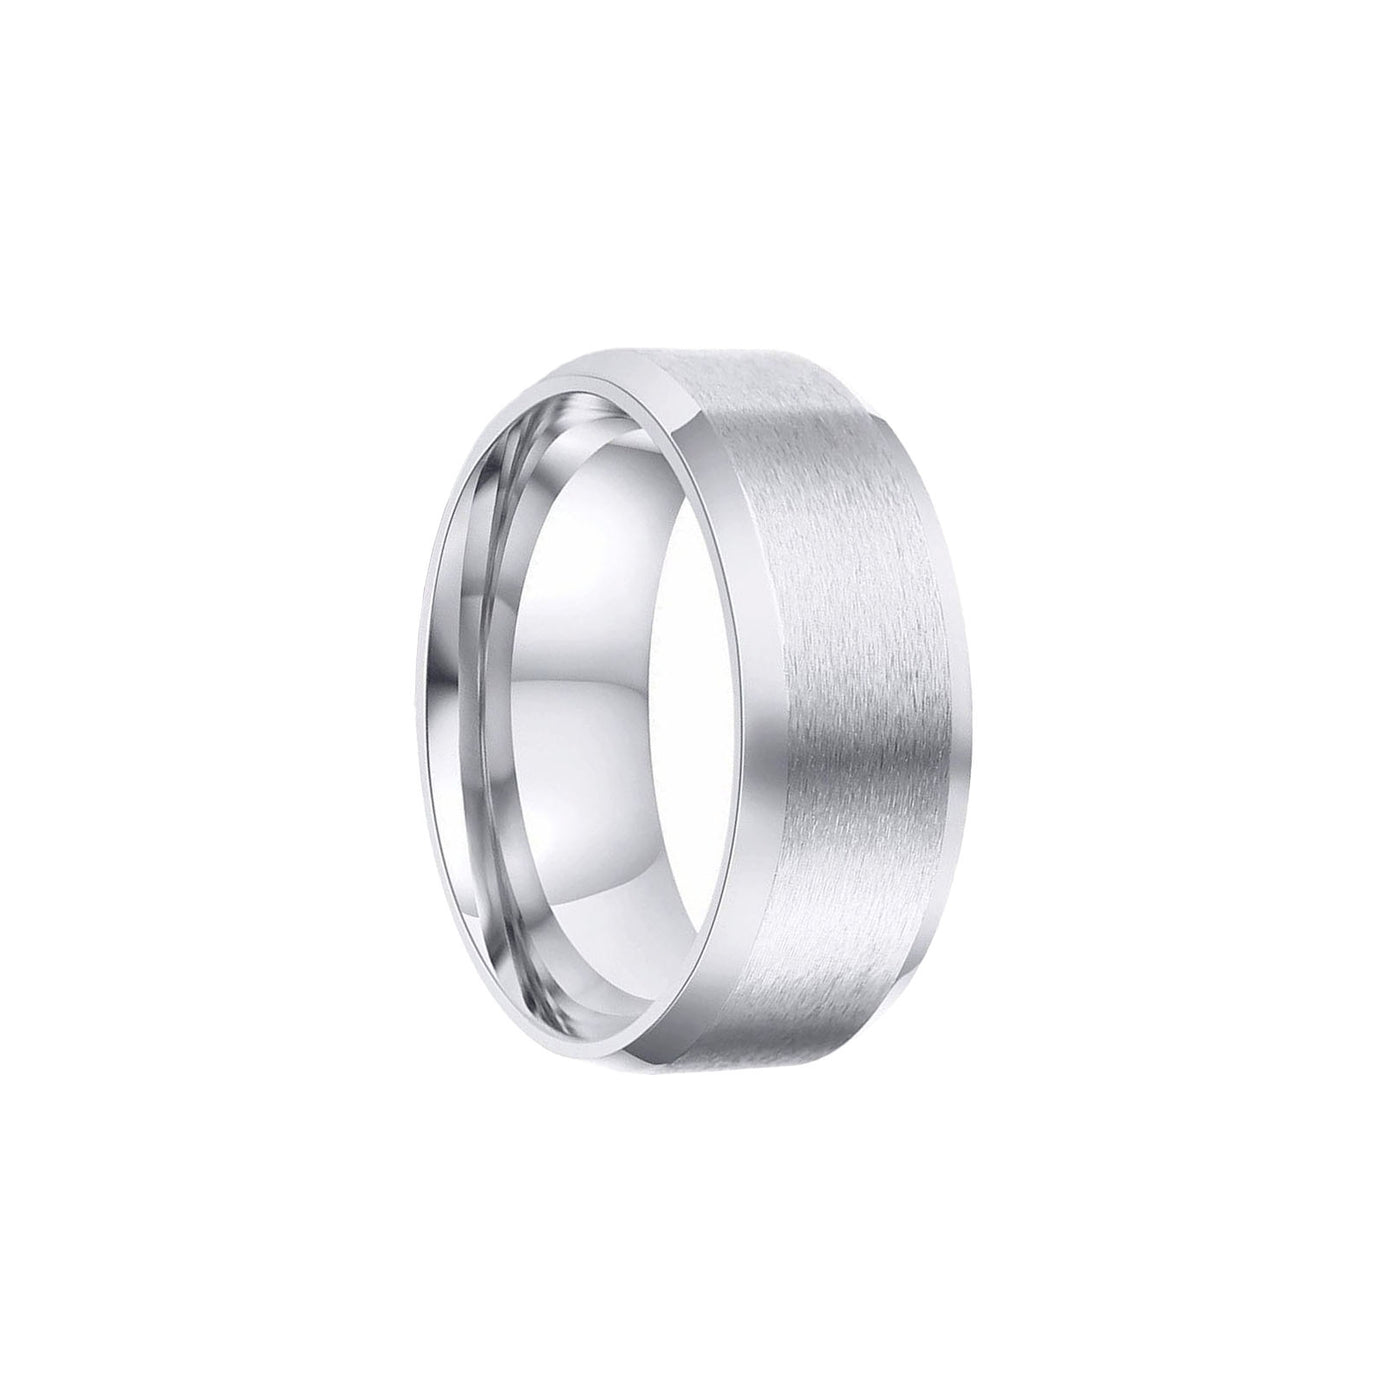 Steel brushed ring 8mm